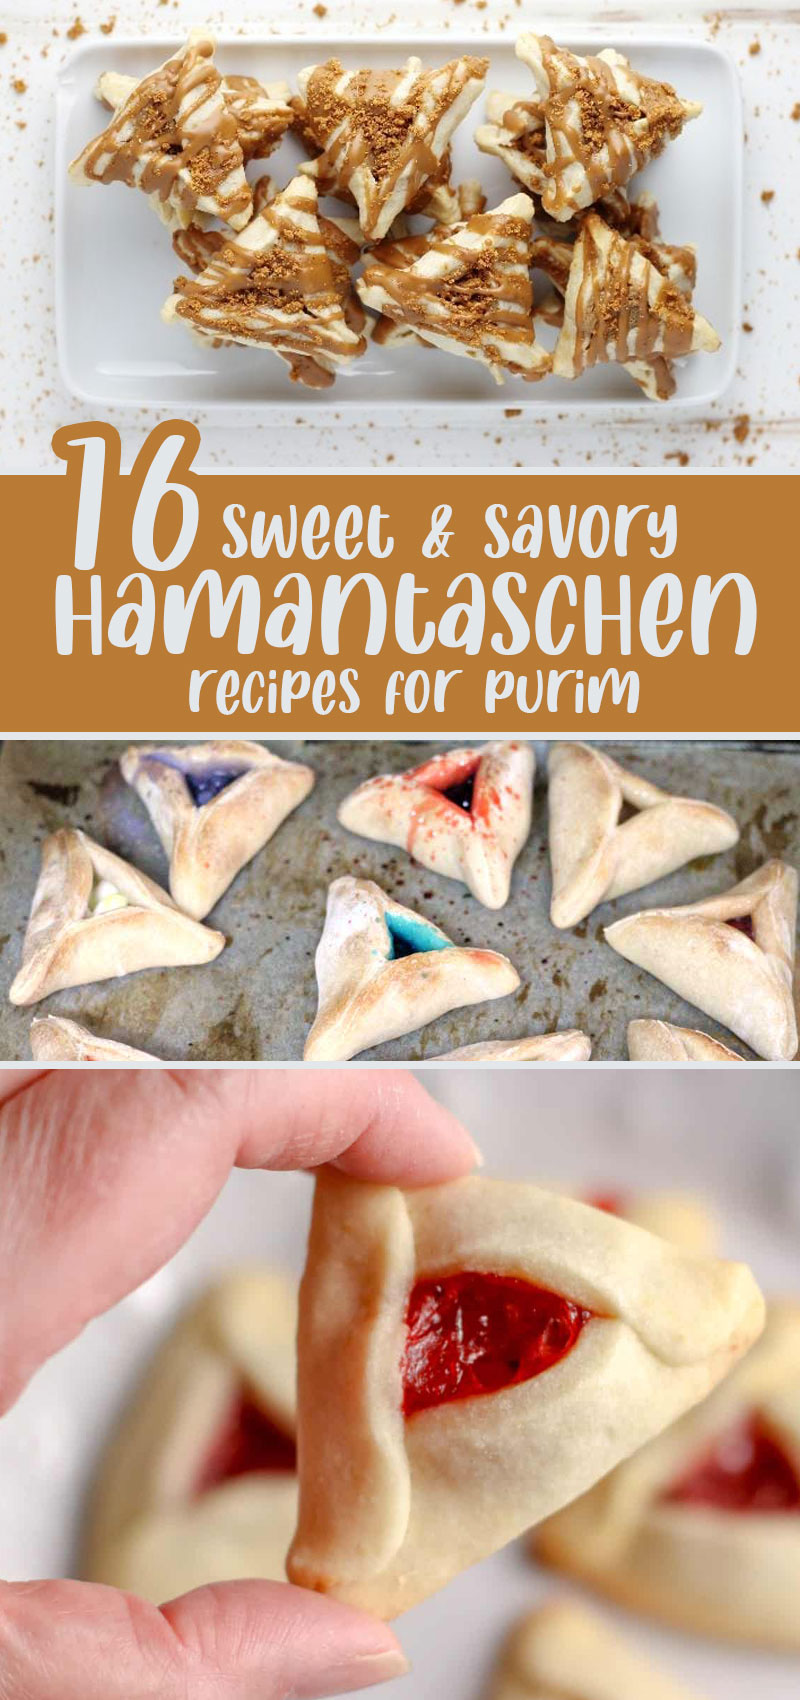 Hamantaschen recipes collage with three iamges and text